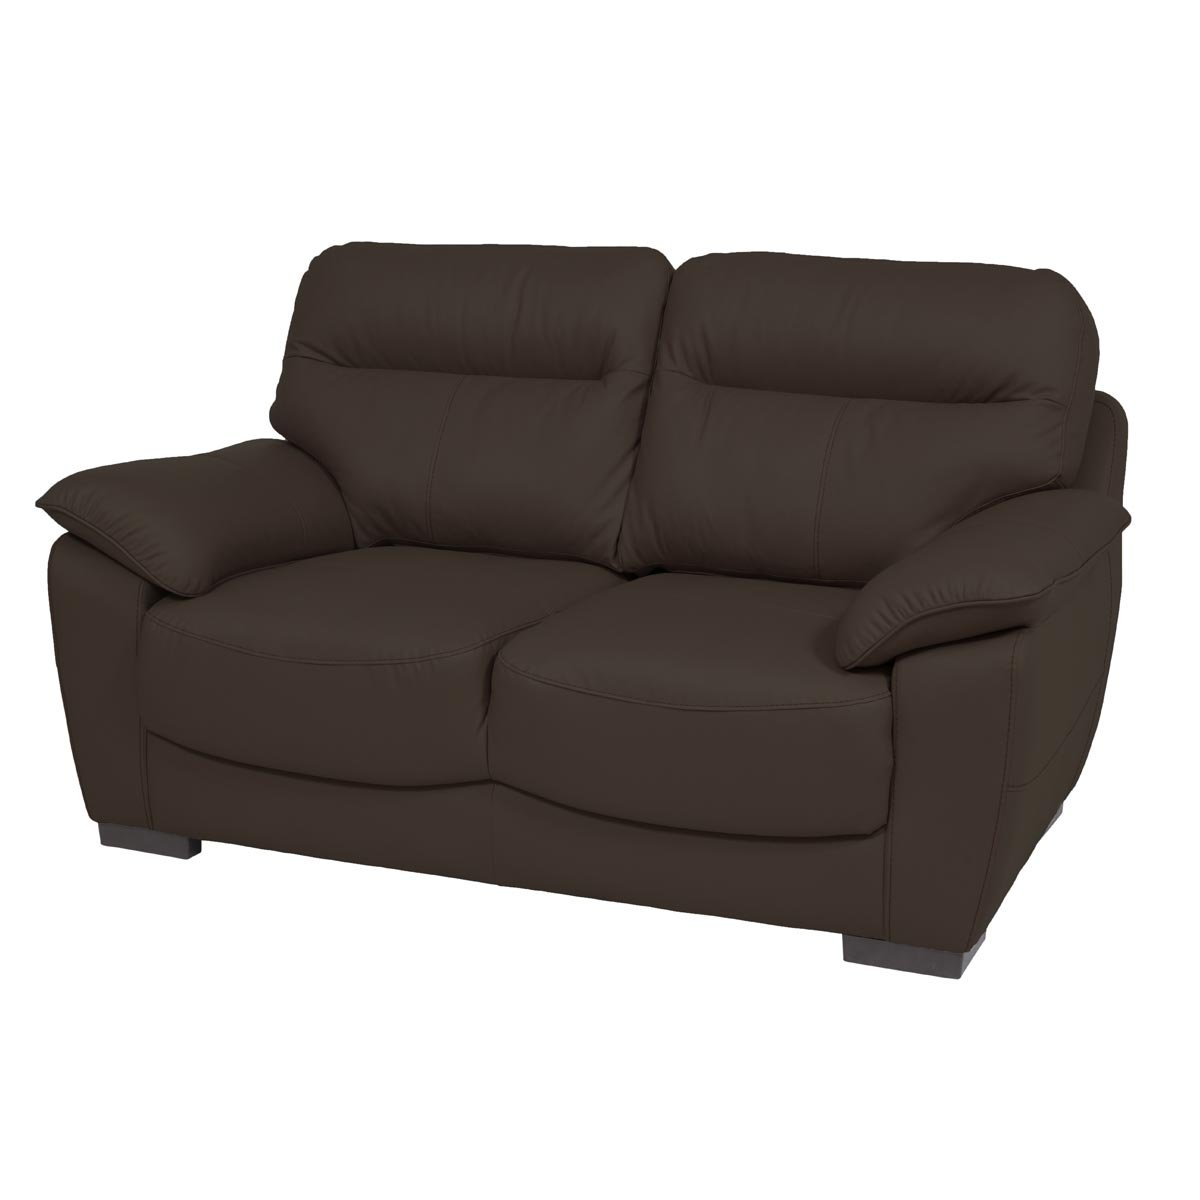 Love Seat Smile Chocolate Piel Boal